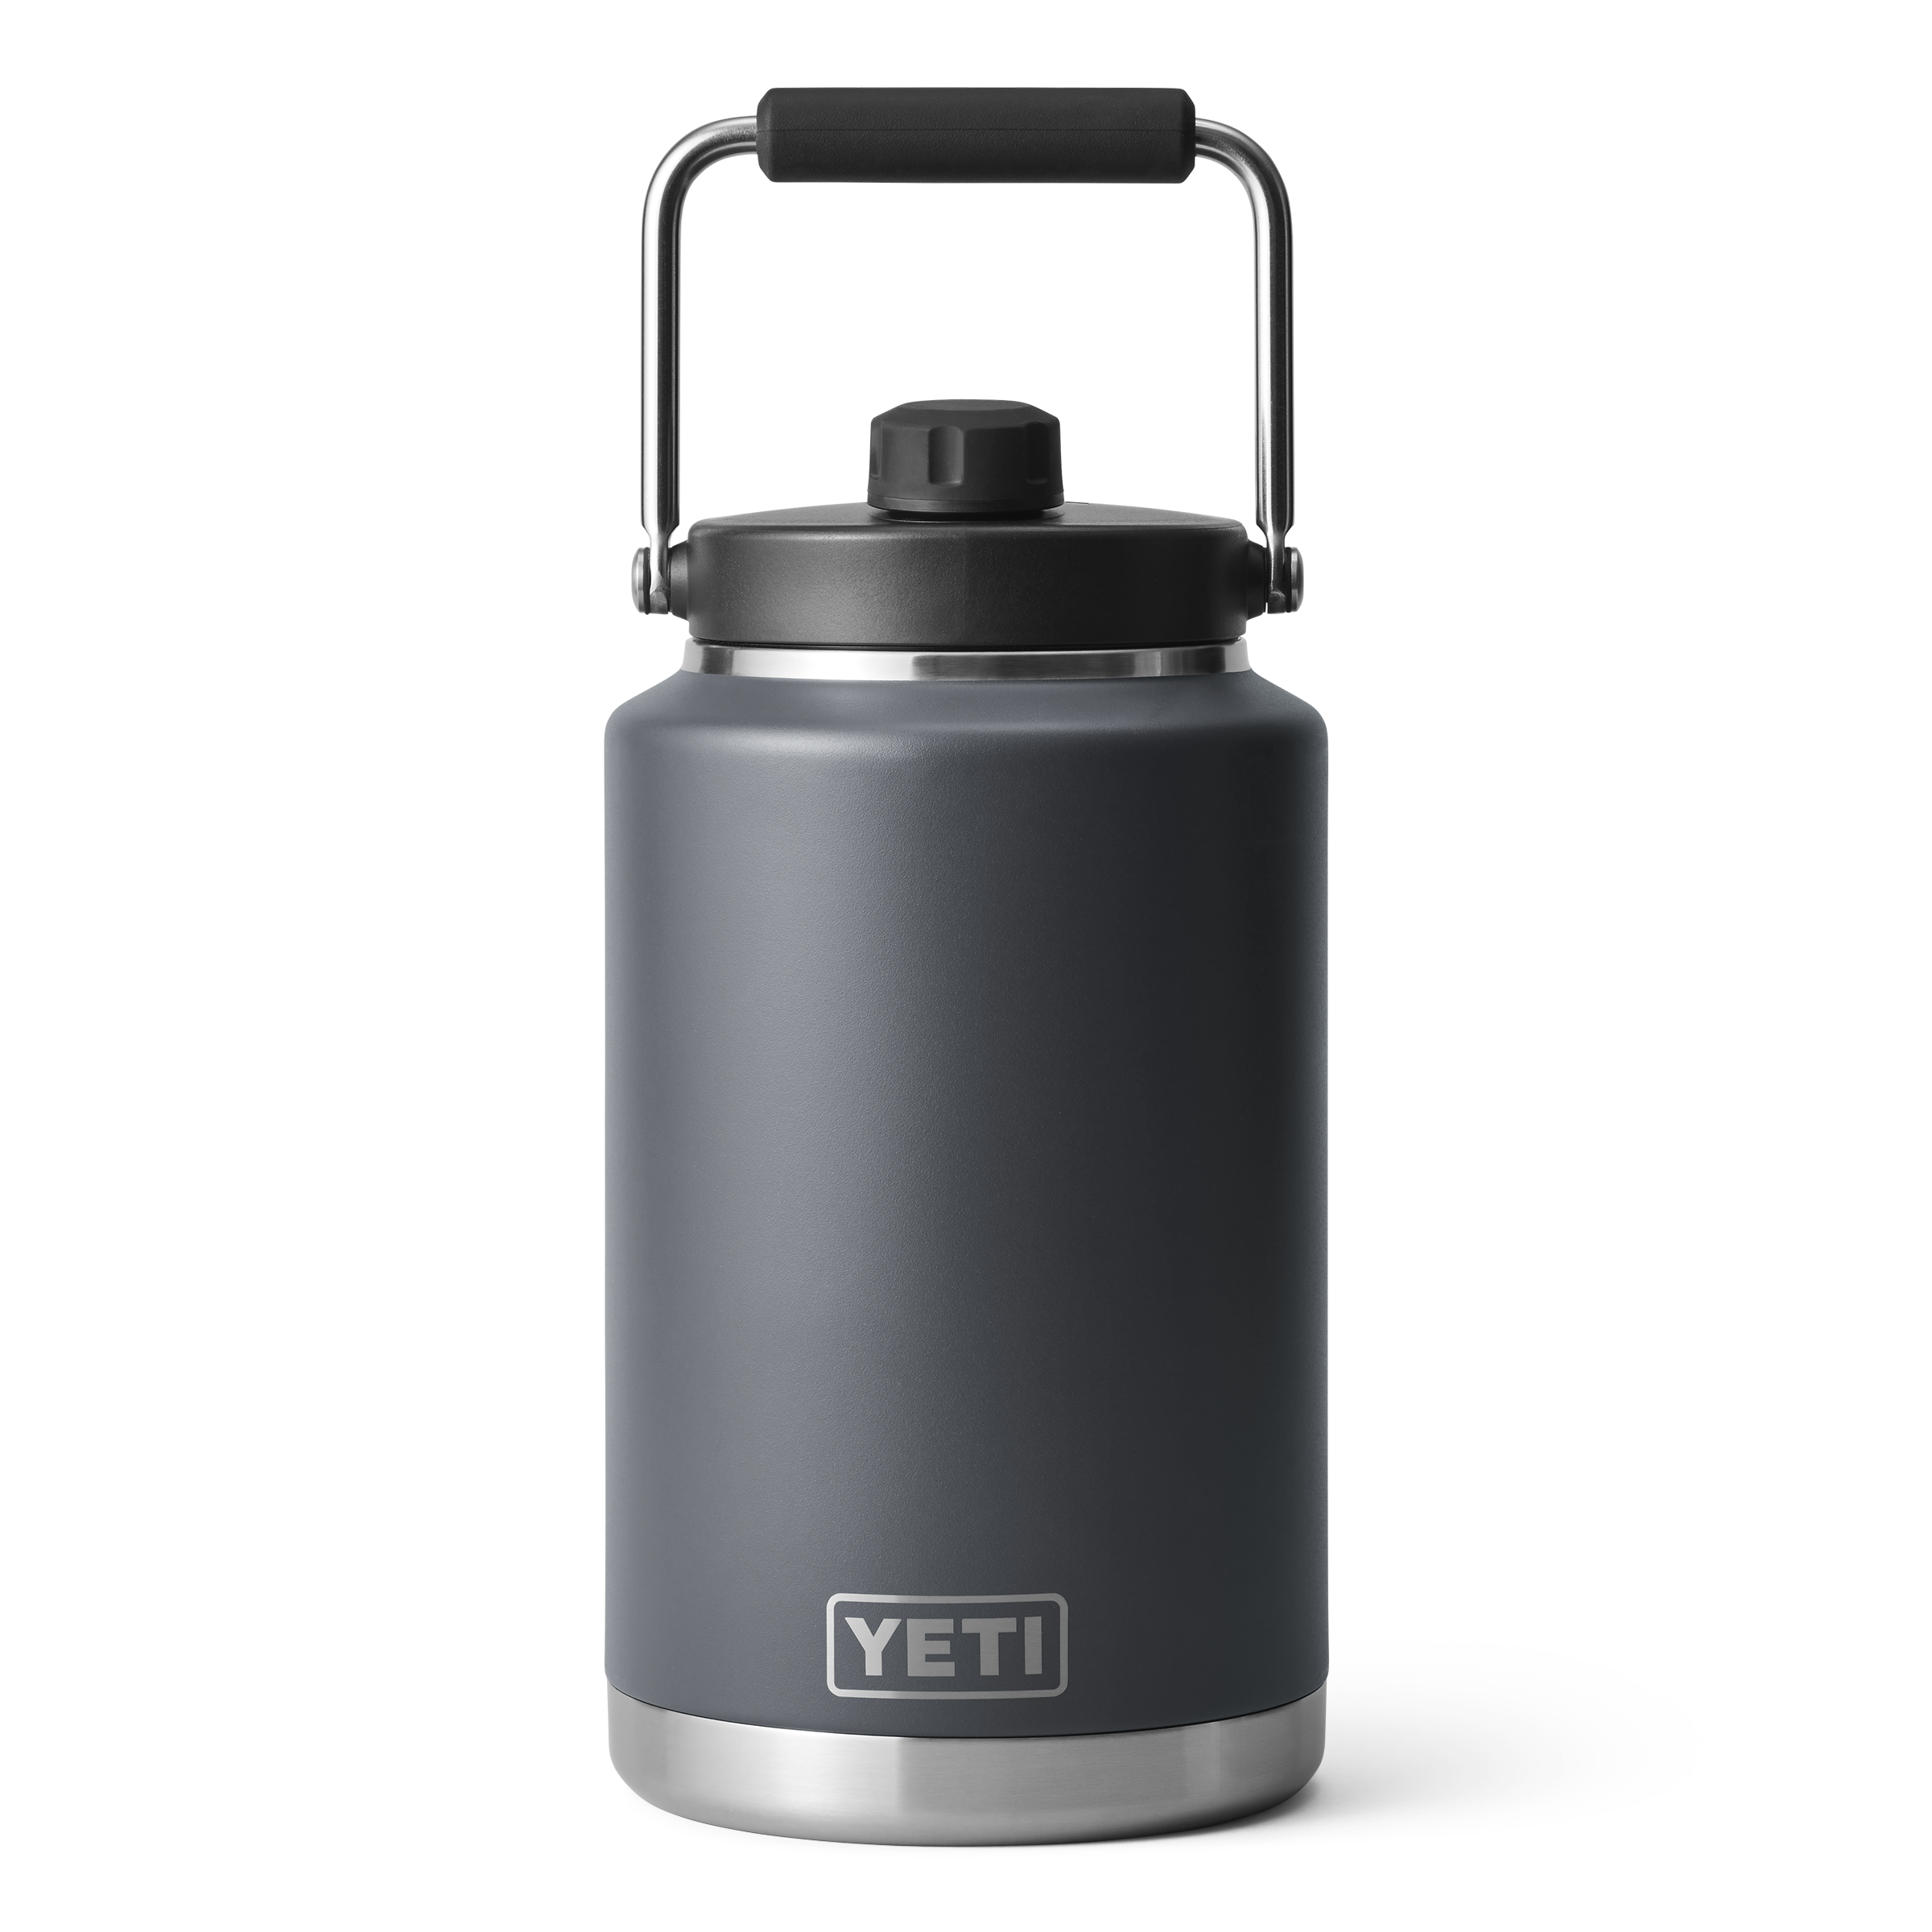 YETI one gallon jug with its handle raised, in the color Charcoal.